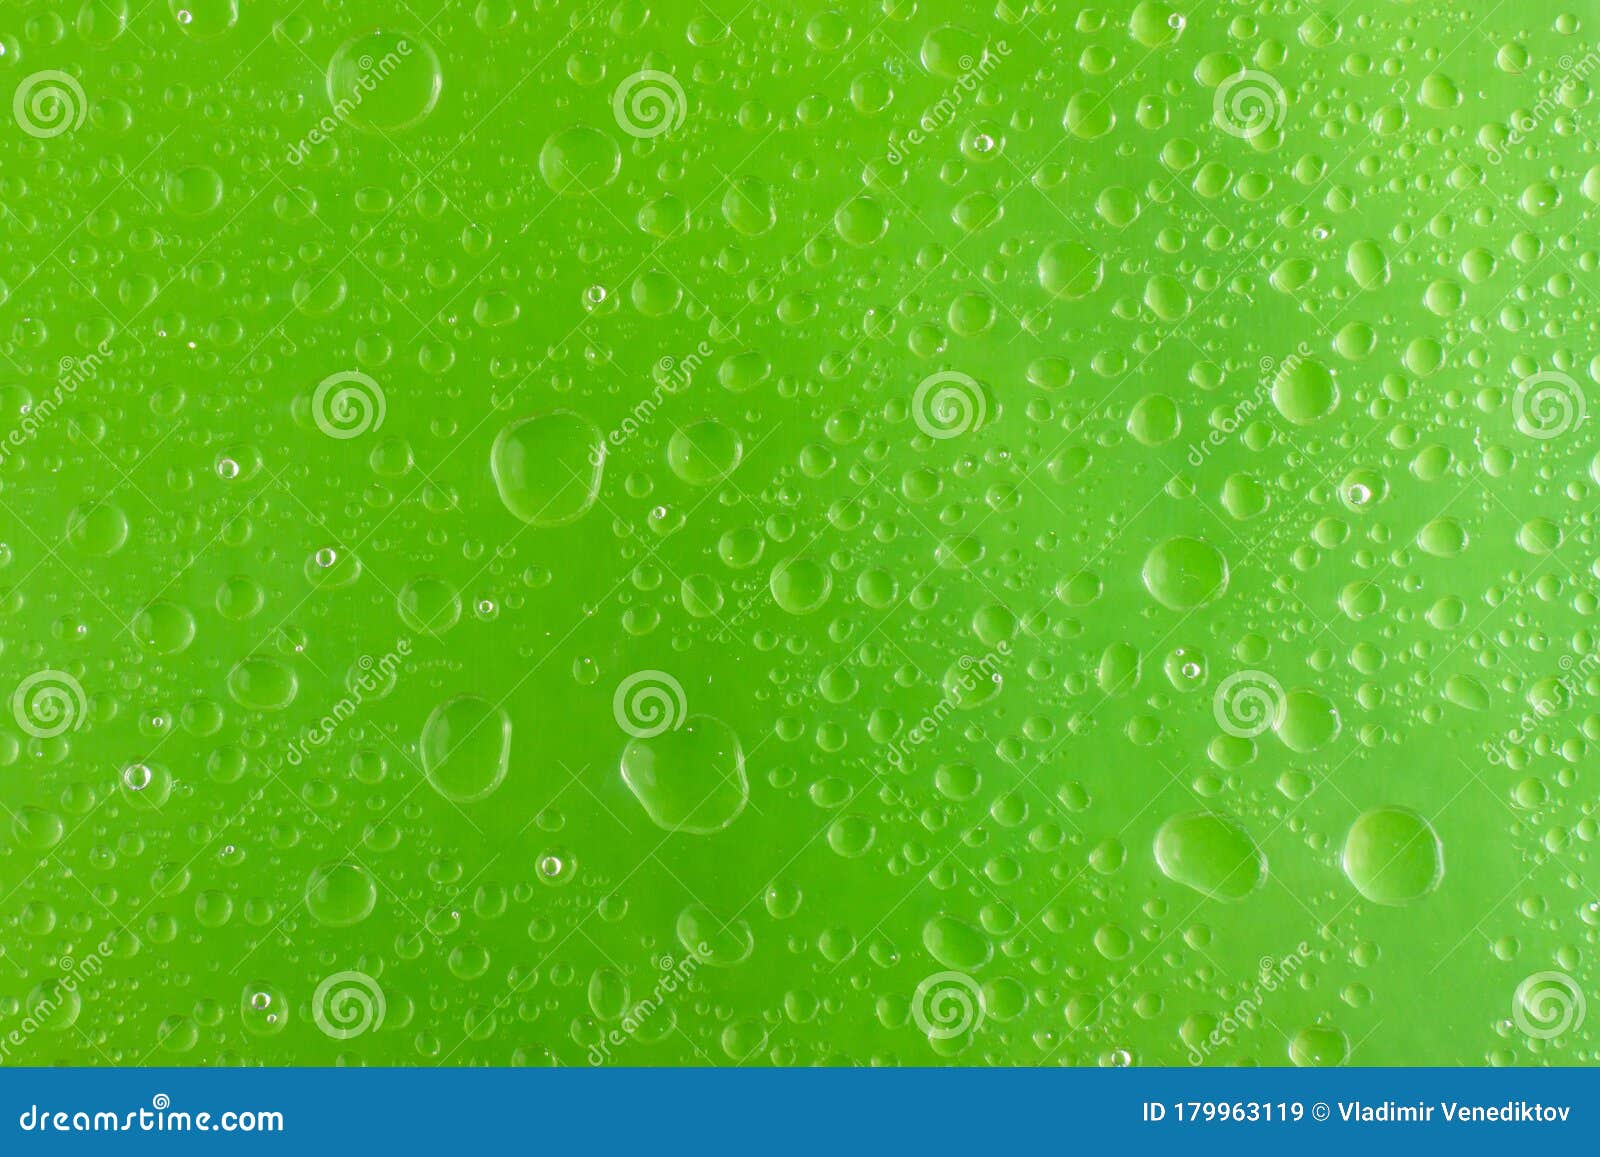 Background for Design of Water Drop Close Up on a Green Surface Stock ...